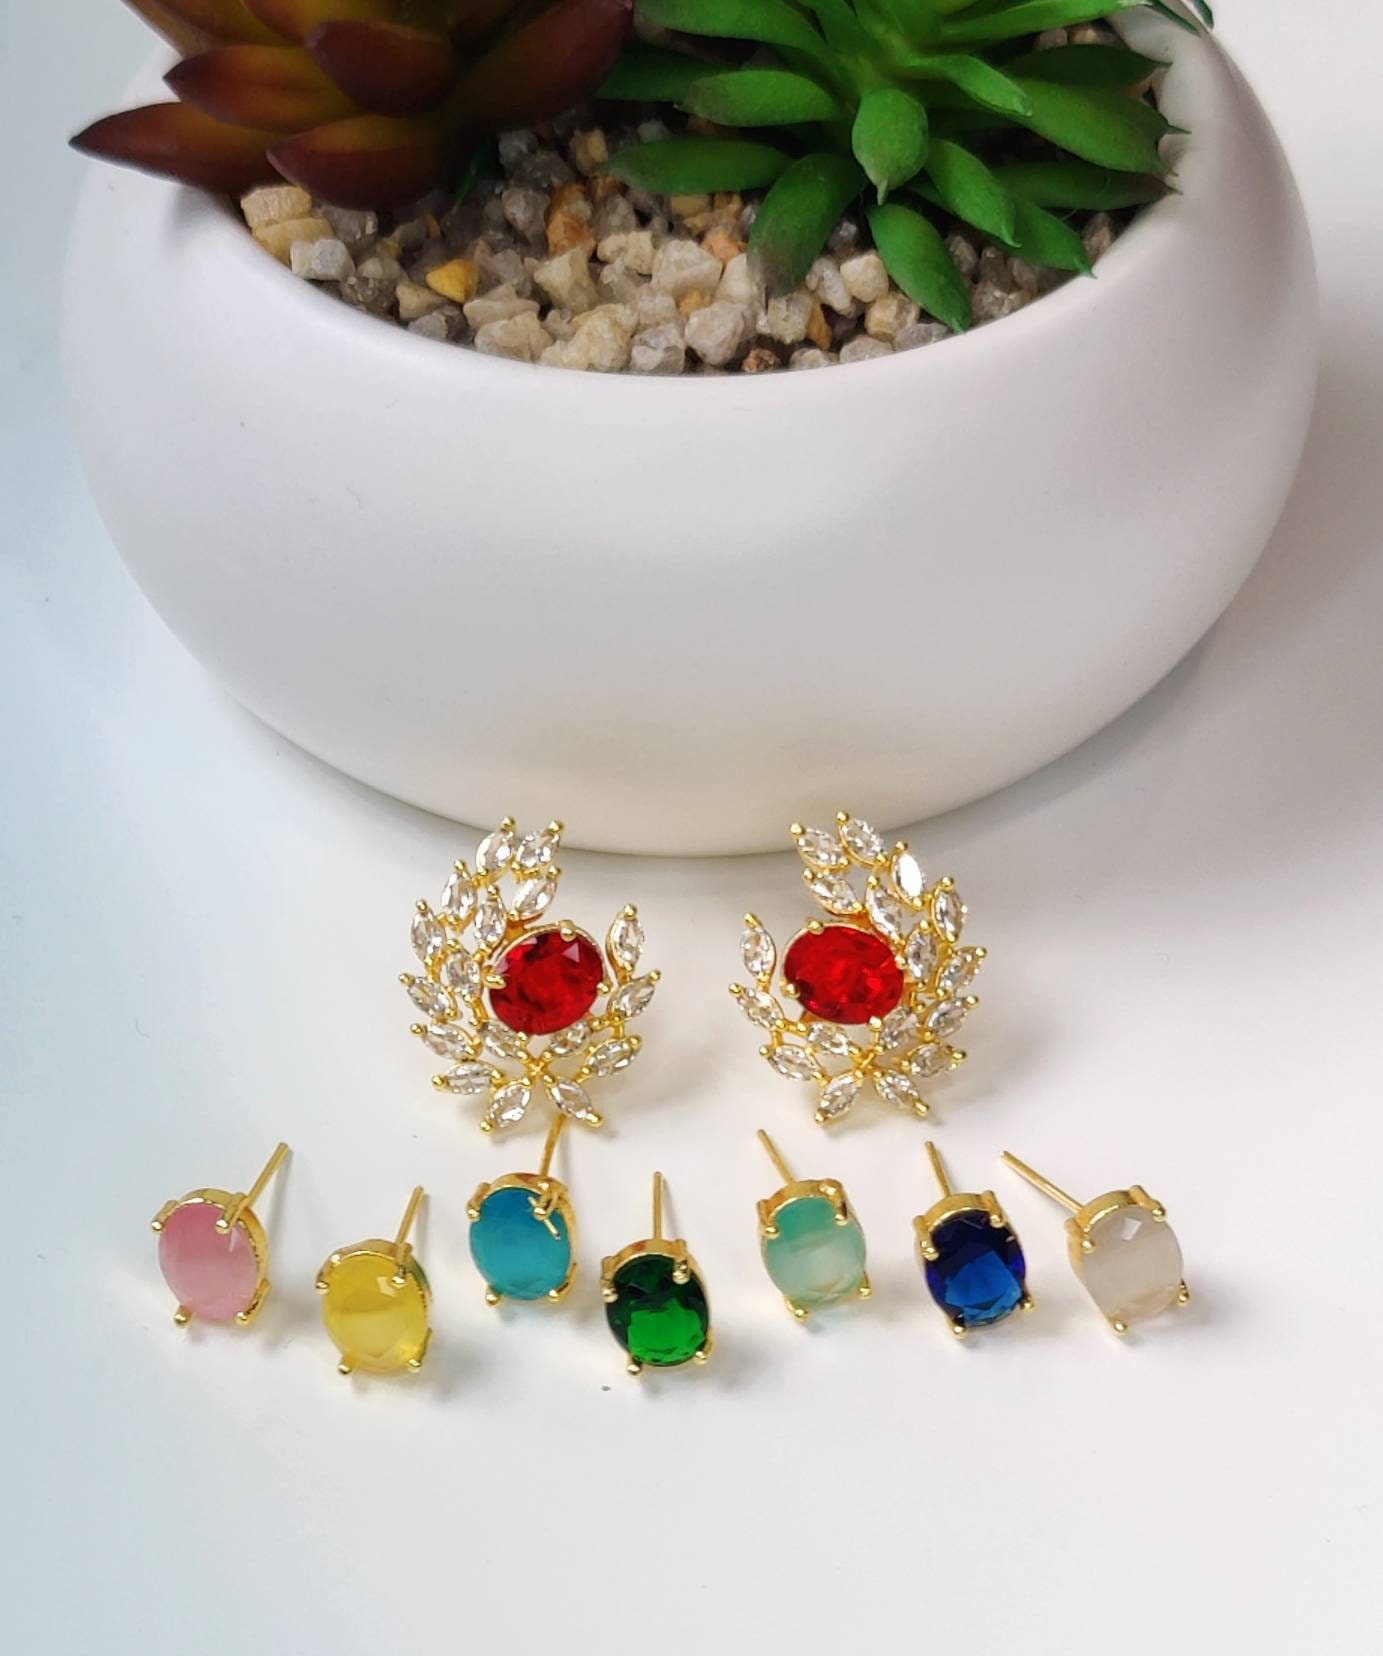 7in1 Gold and Diamond Detachable Earrings with Interchangeable Emeralds   Rubies Can be worn